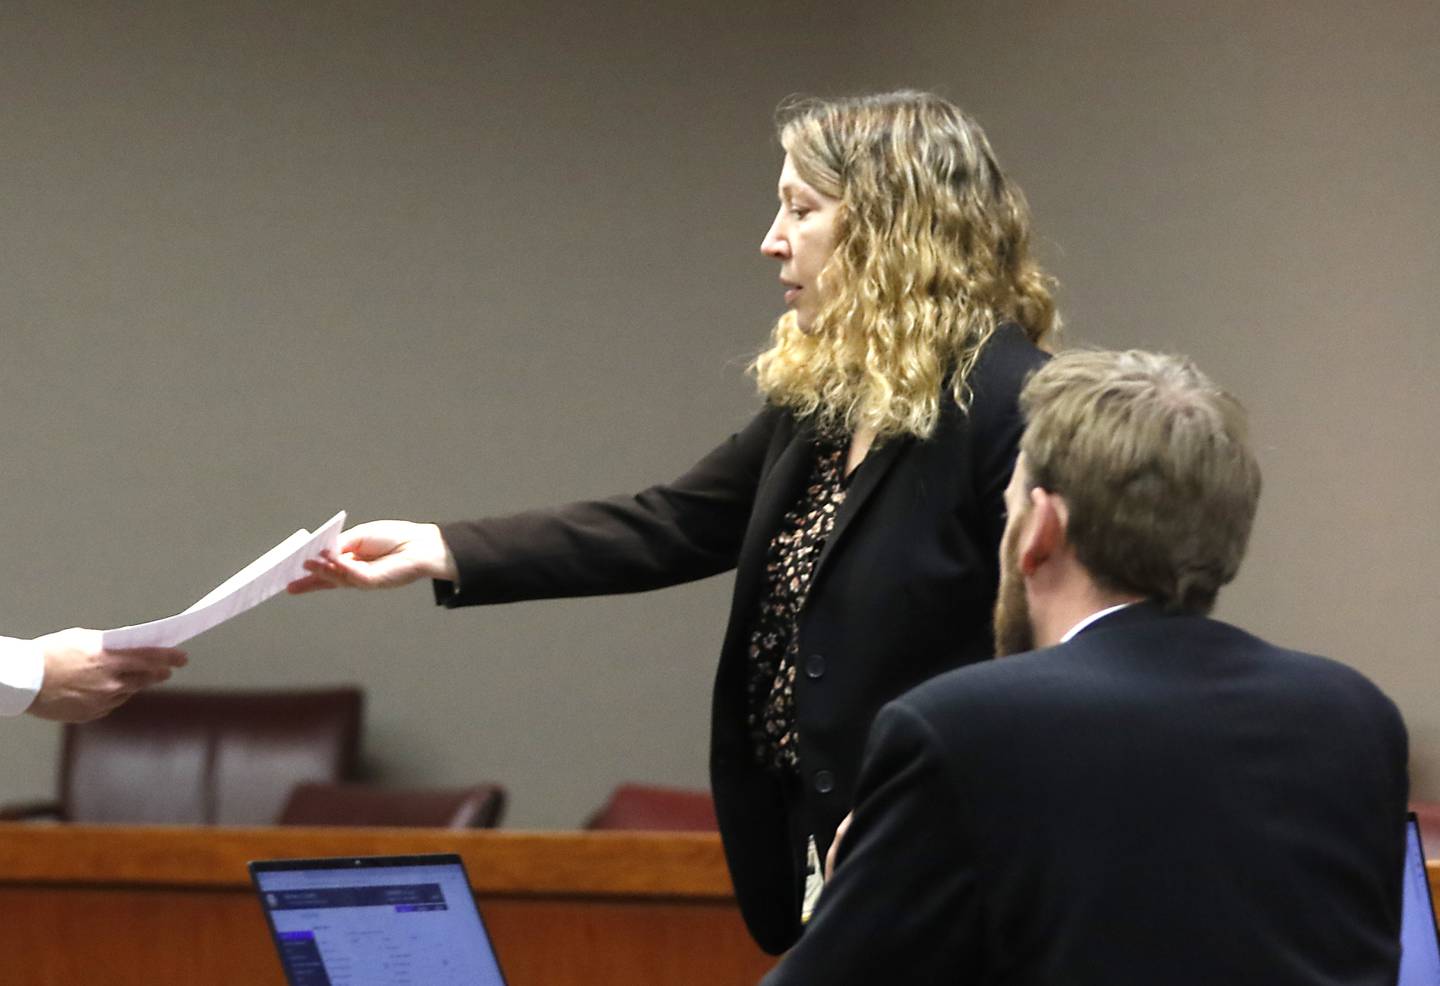 State's attorney Sharyl Eisenstein hands a piece of paper to the court security officer to hand to Judge Michael Coppedge on Monday, Nov. 14, 2022, during the trial of Robert J. Gould, 56. Gould, who was on McHenry County’s most wanted list when arrested in 2017, is accused of repeatedly sexually abusing two children throughout their childhoods beginning in 2001.